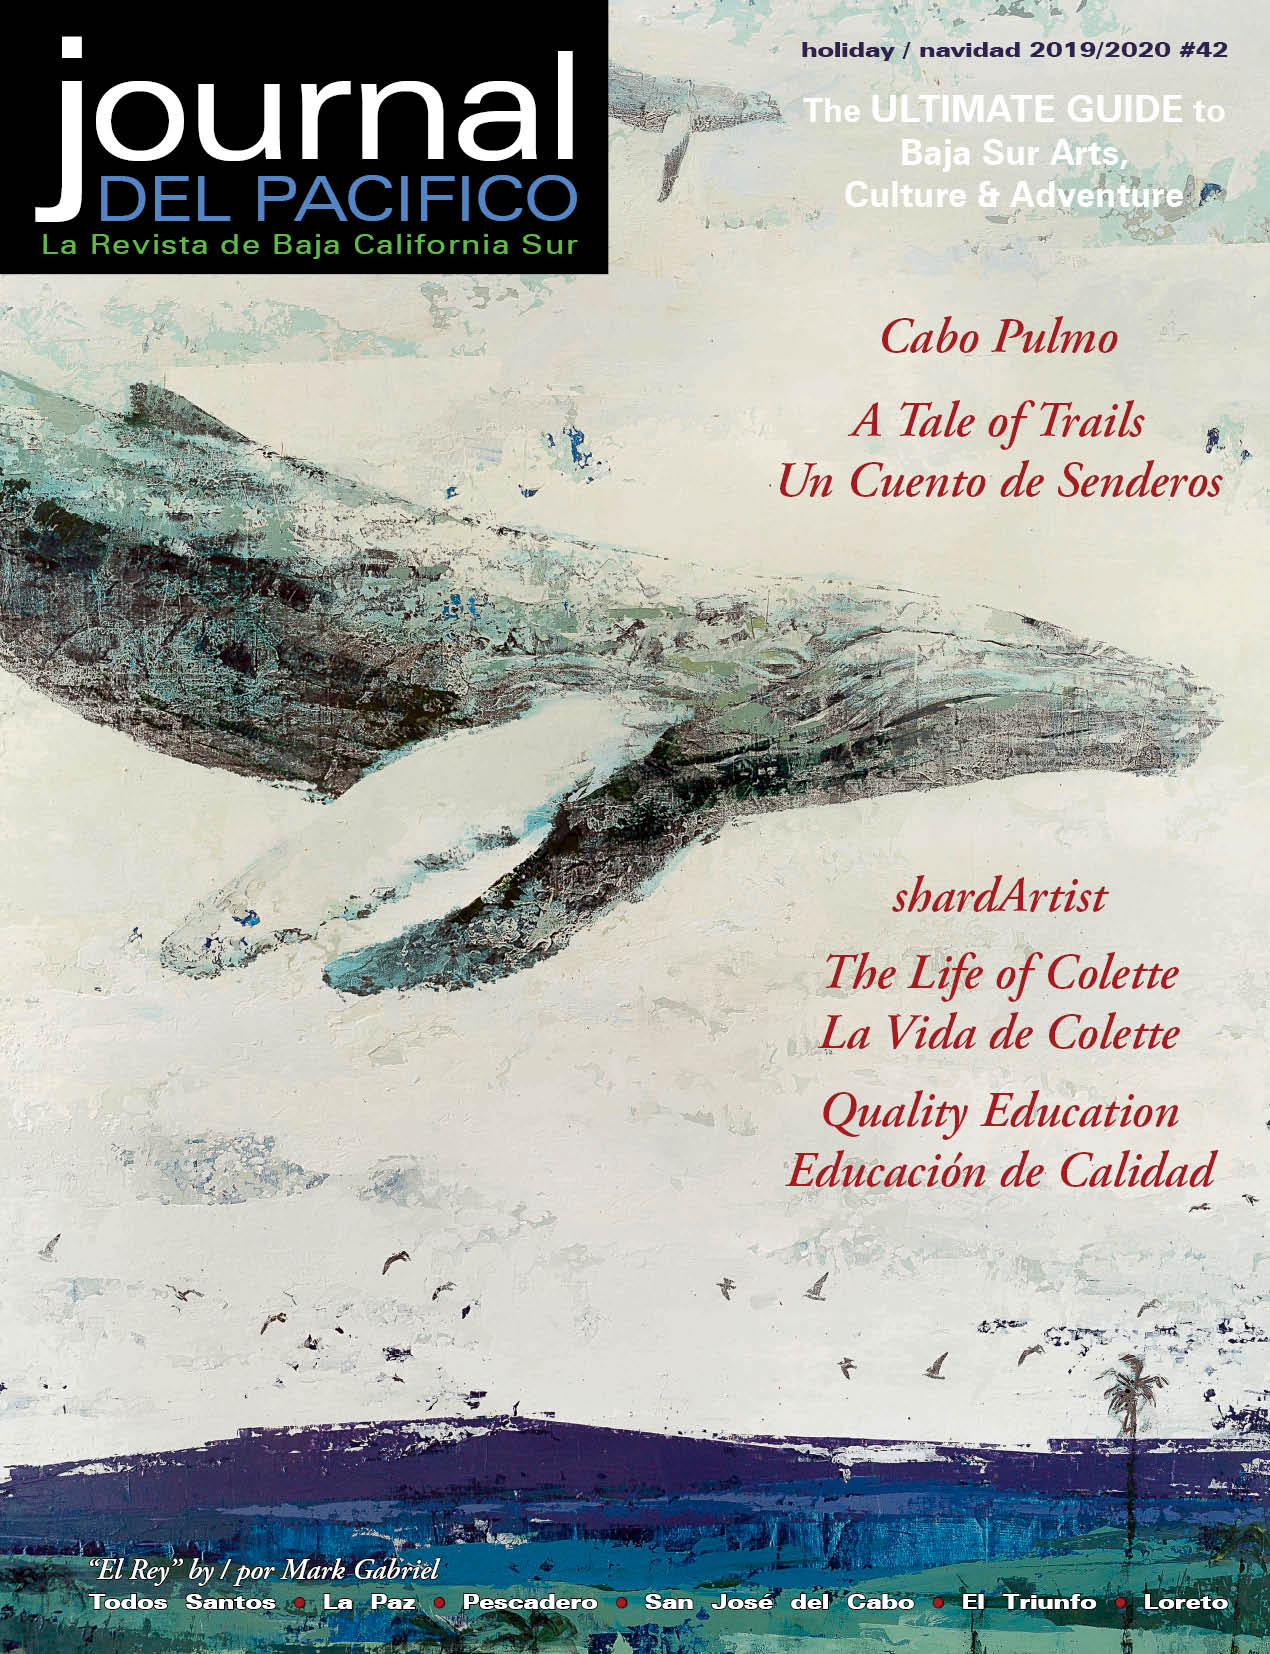 Holiday/Navidad 2019/2020 Issue of Journal del Pacifico